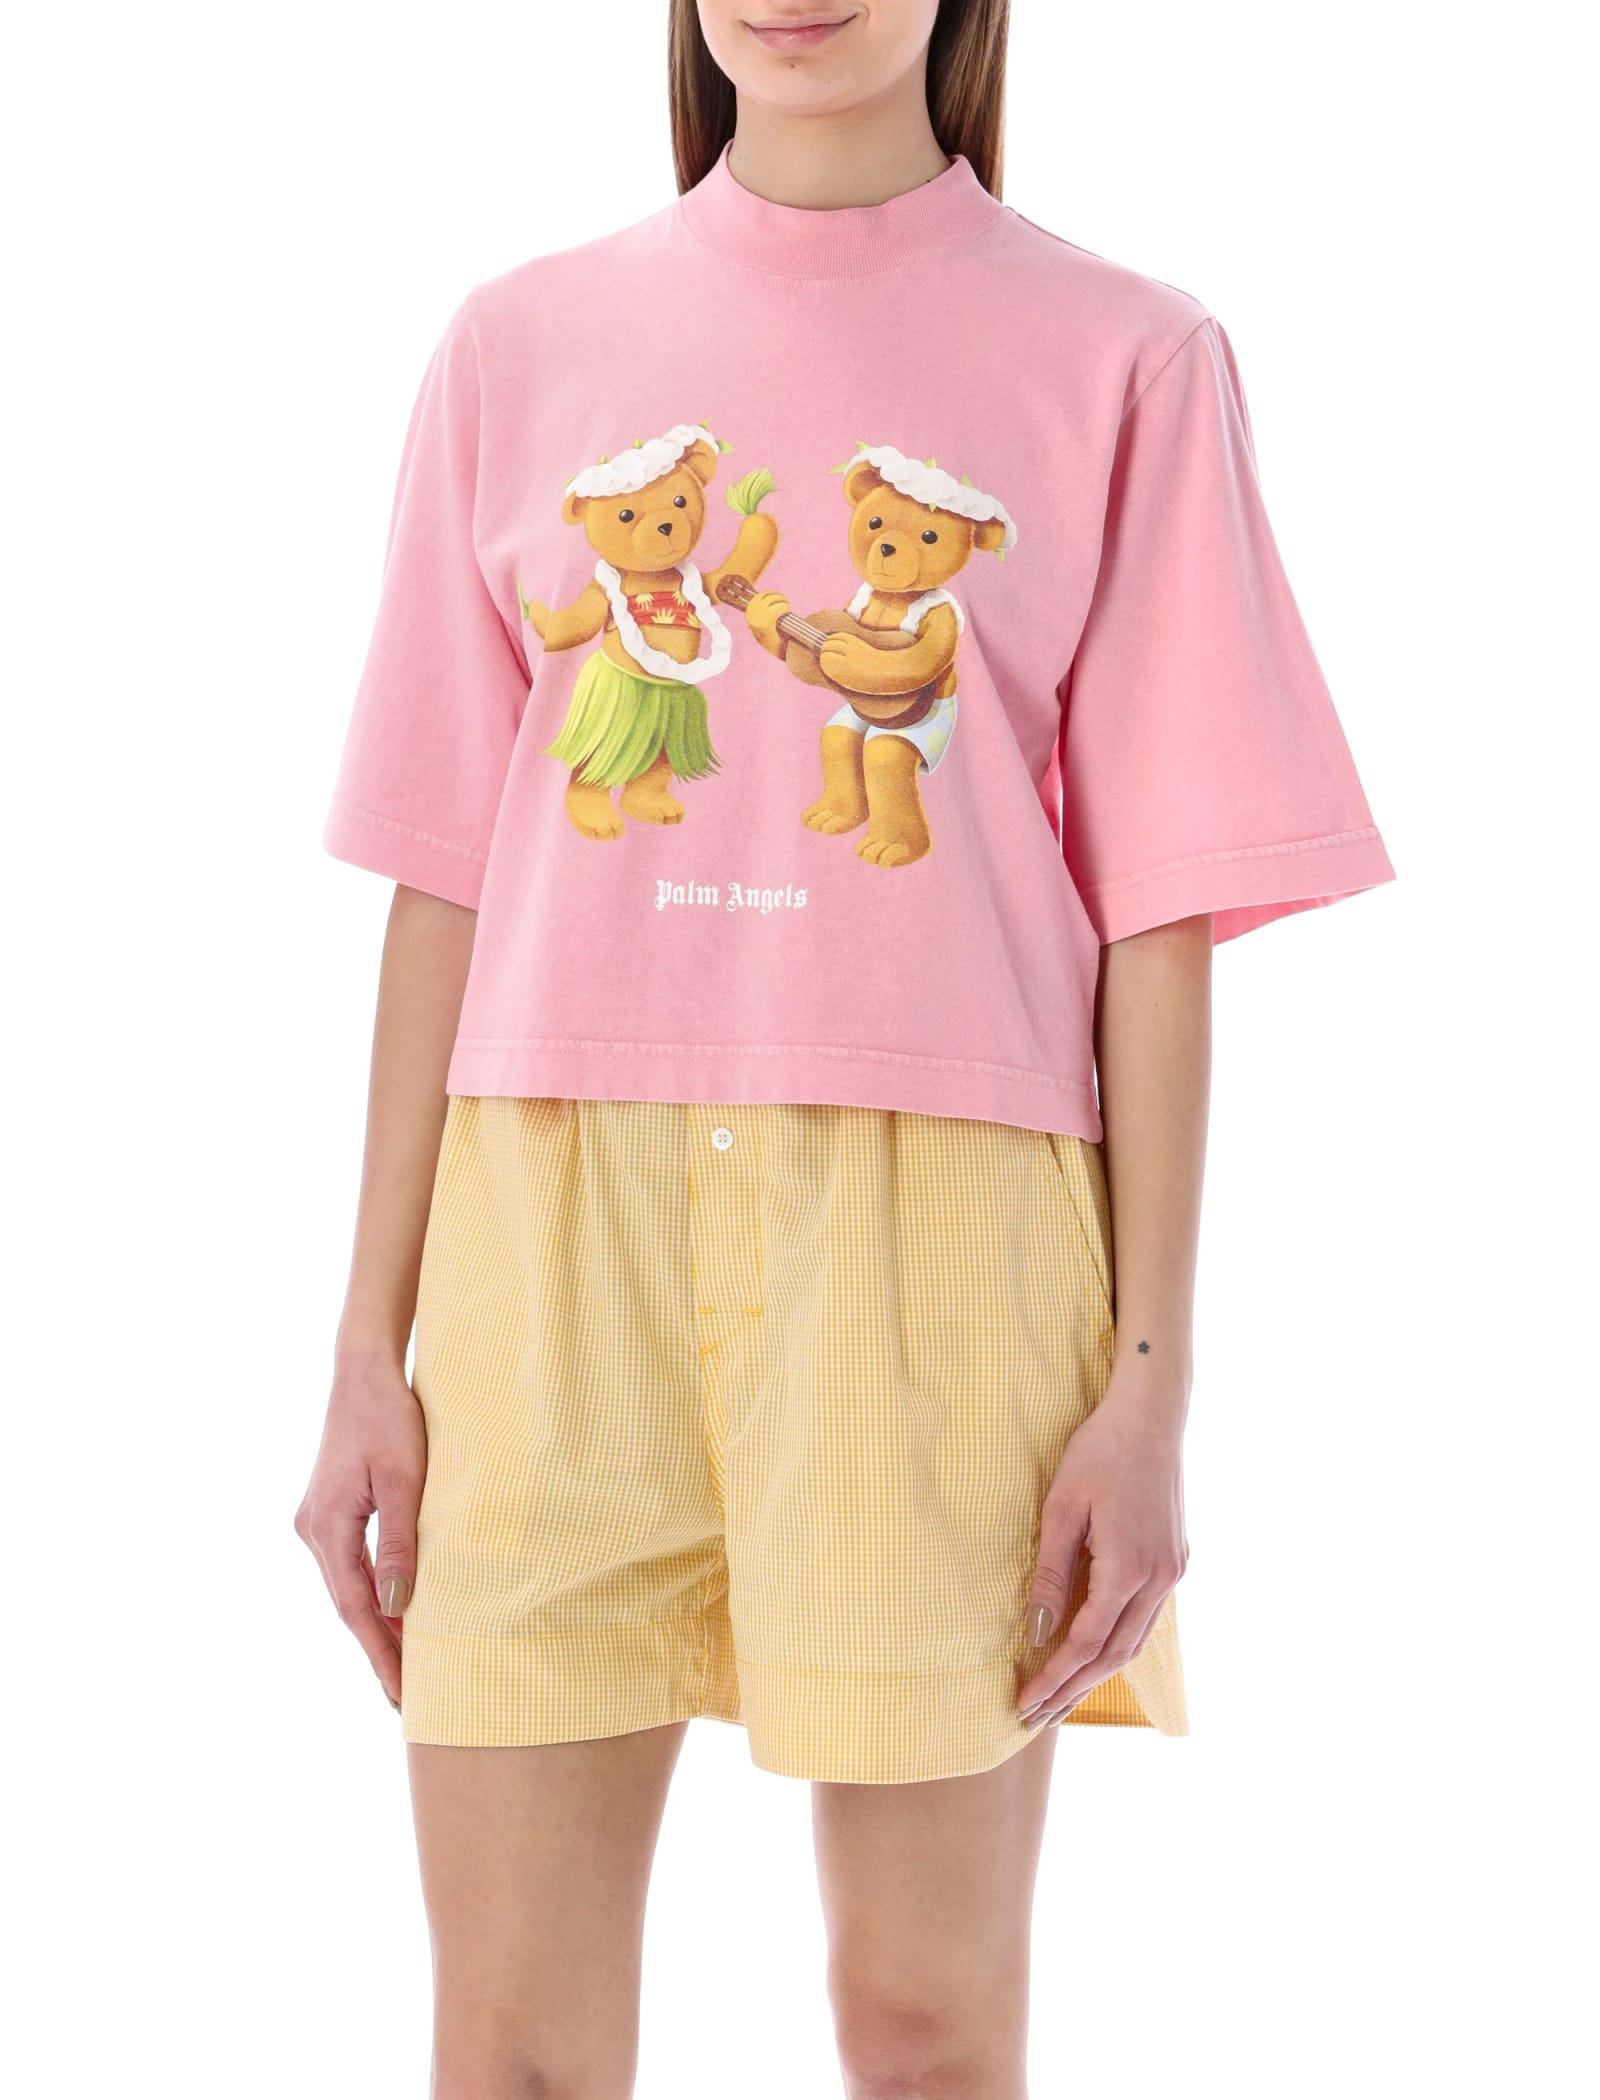 Palm Angels Dancing Bears Cropped T-shirt